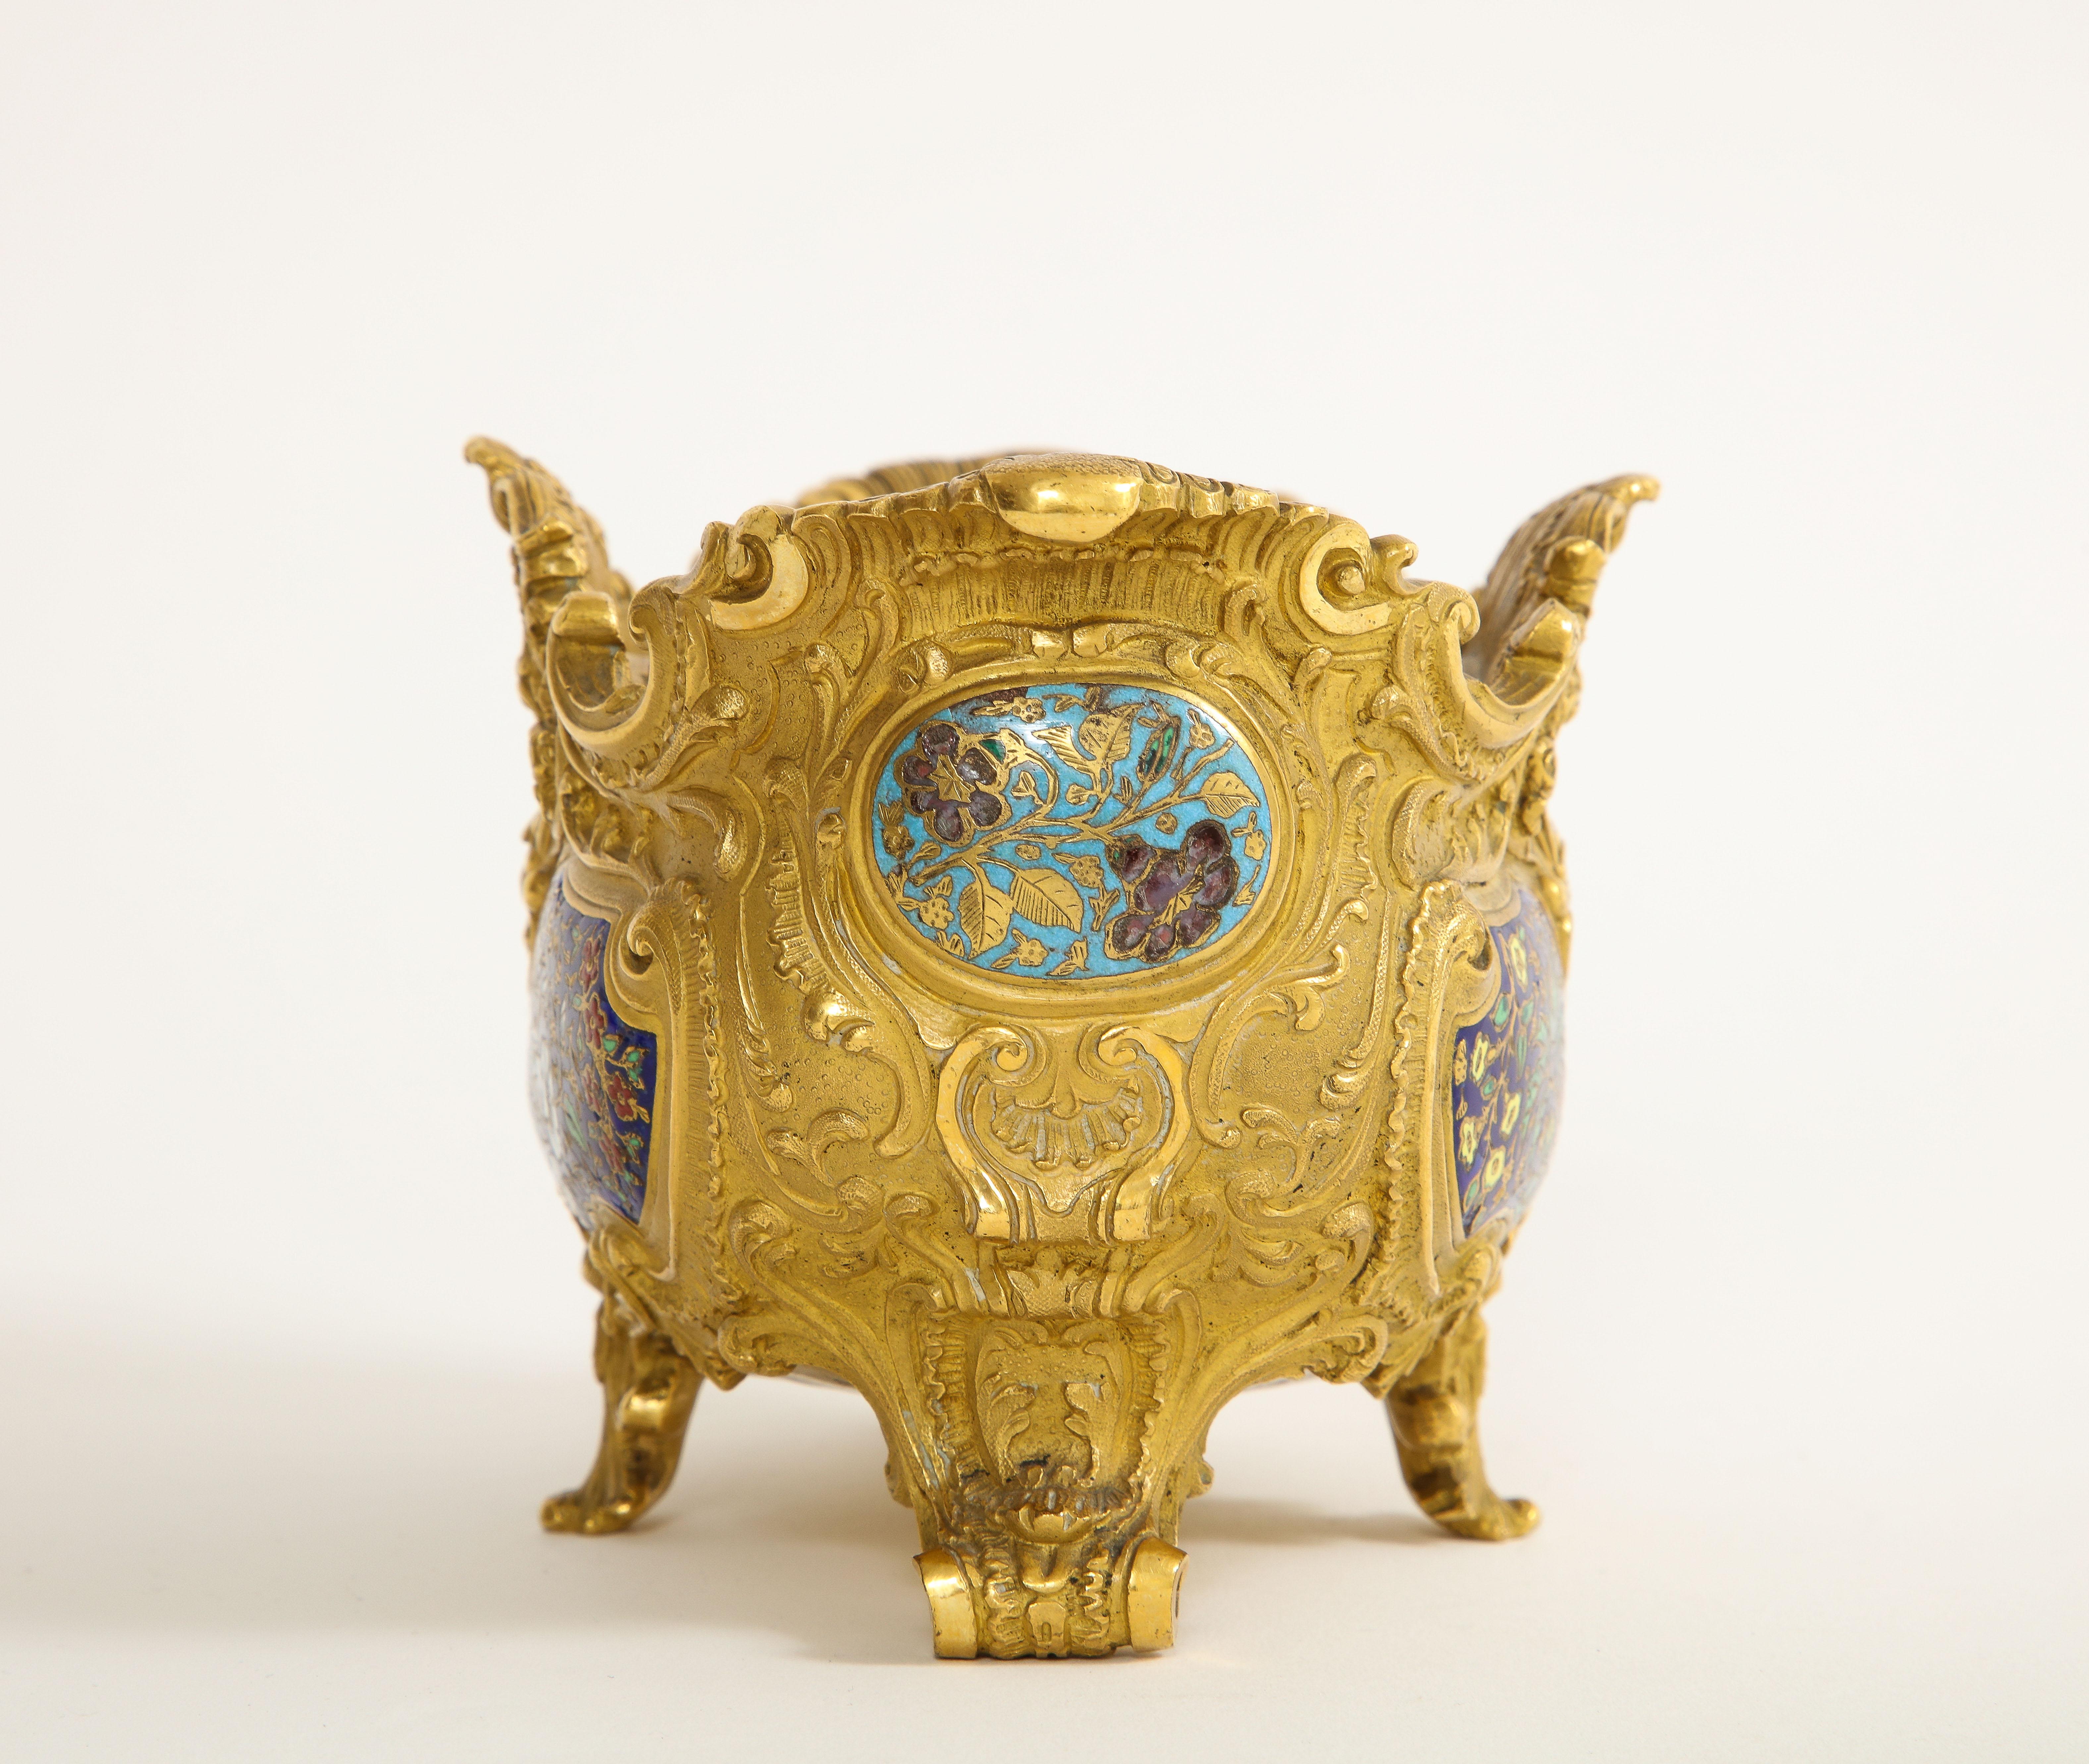 A 19th C. French Ormolu Champlevé Enamel Footed Centerpiece, Att. Barbedienne For Sale 4